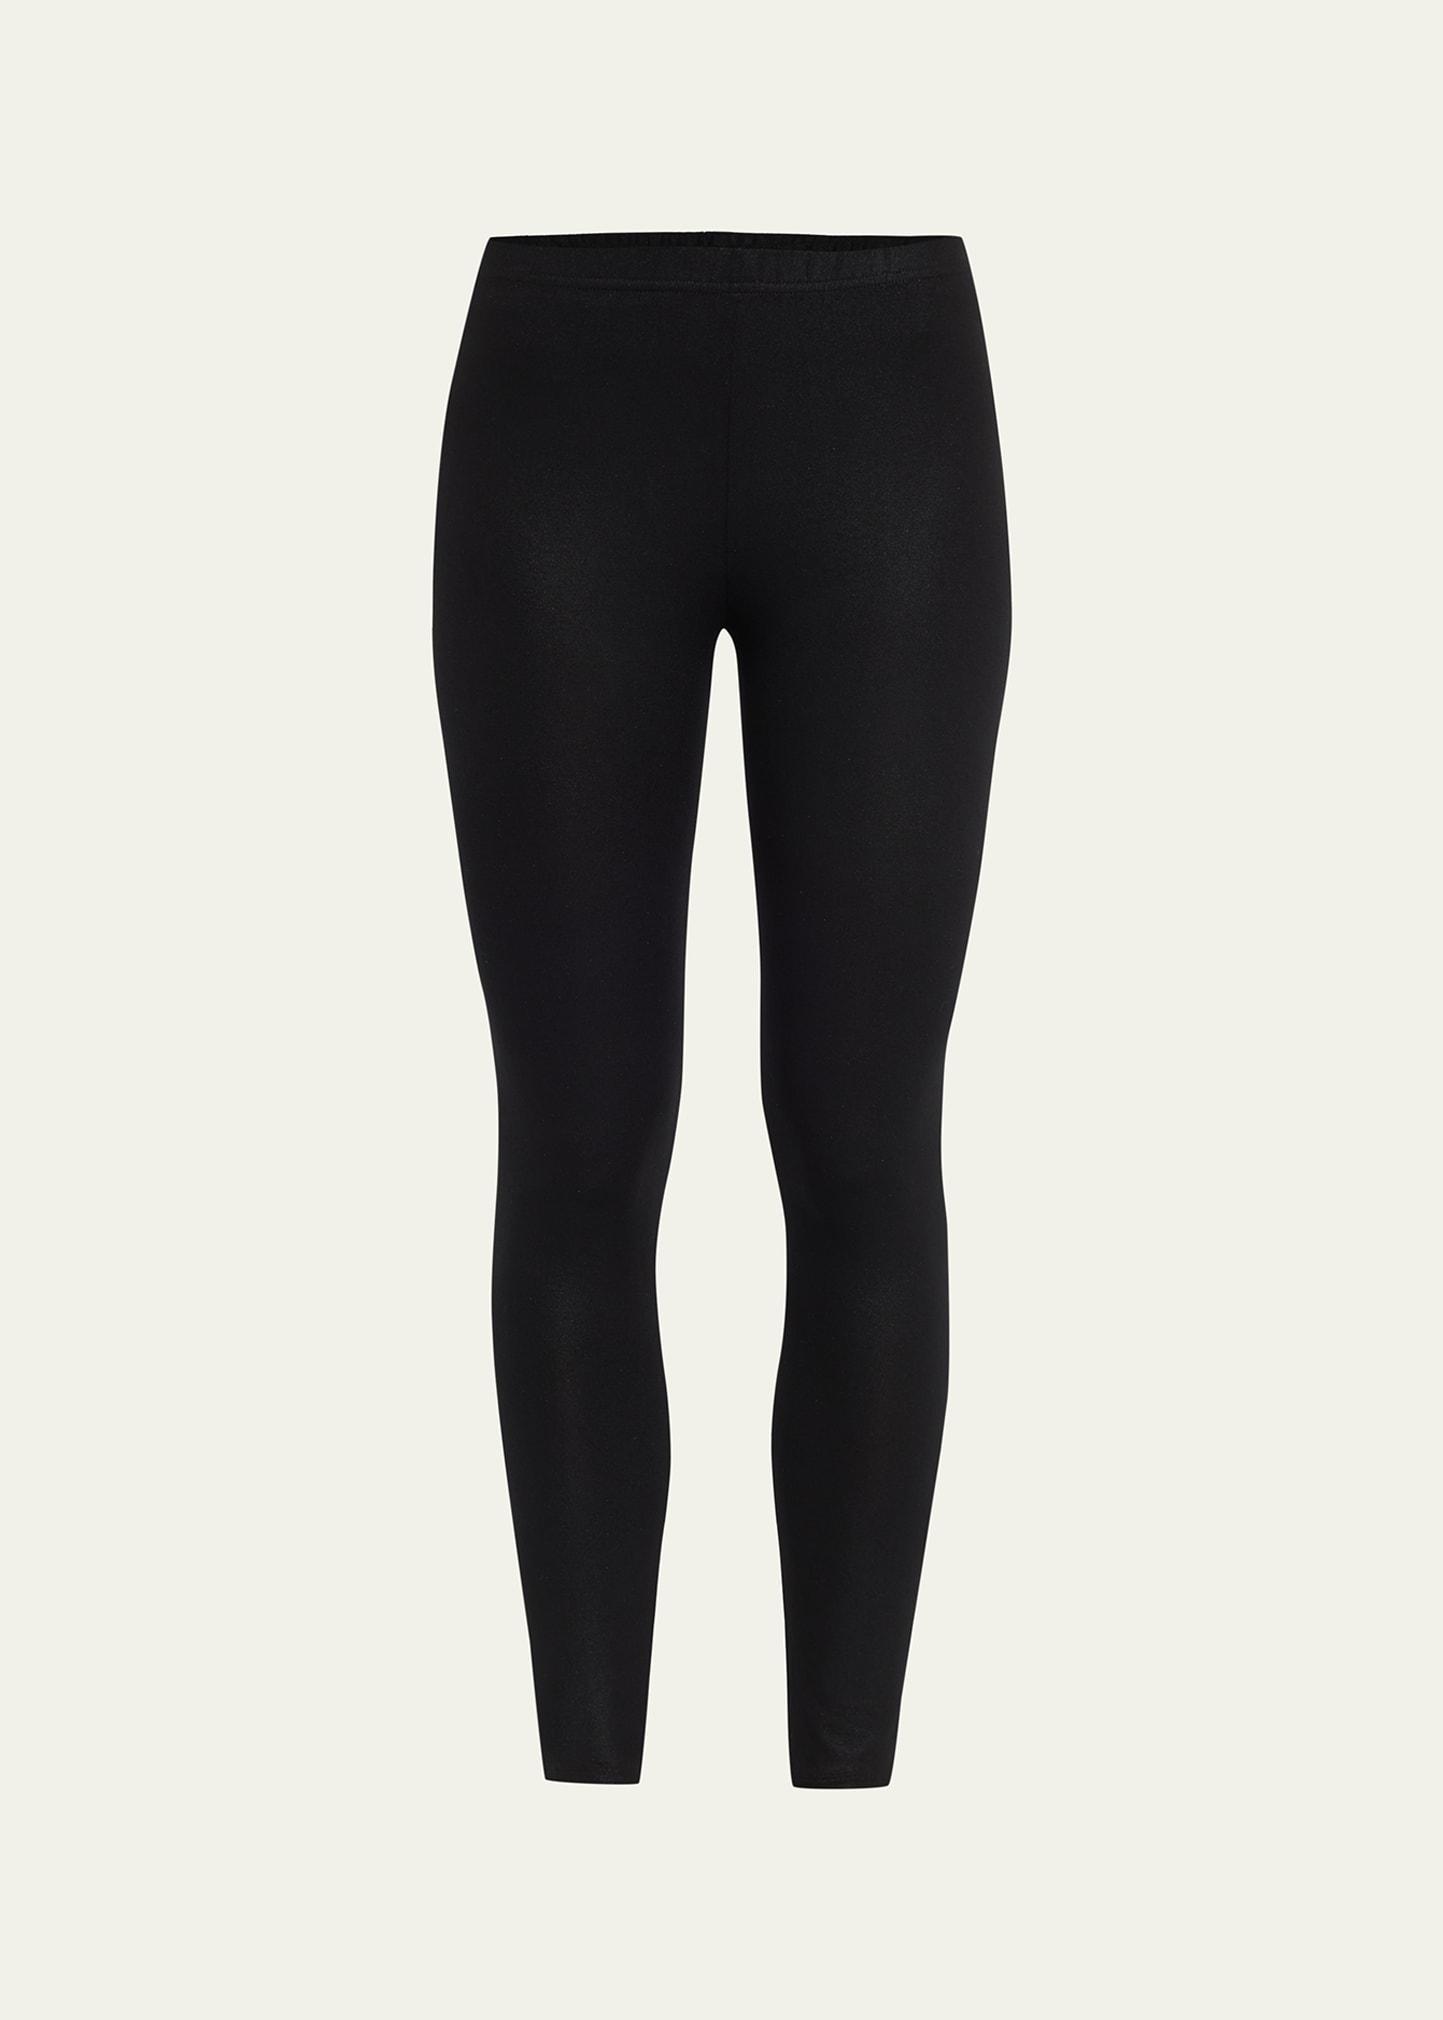 Soft Touch Metallic Leggings Product Image